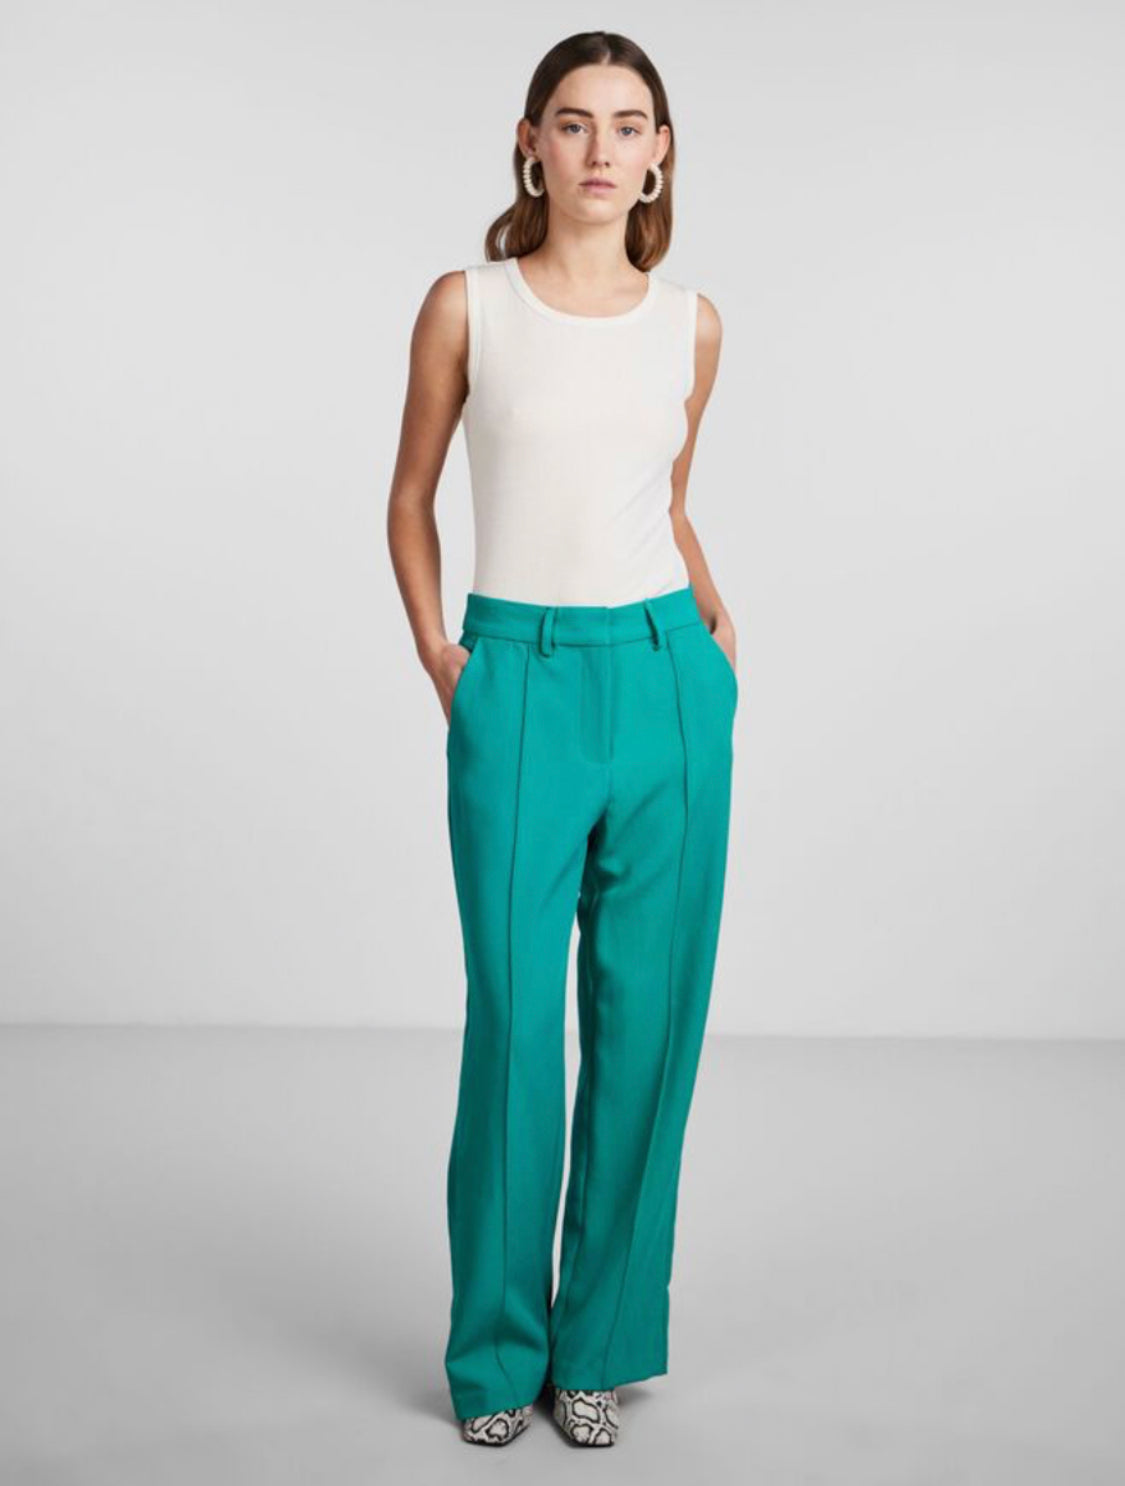 Jella High Waisted Trousers from YAS Apparel